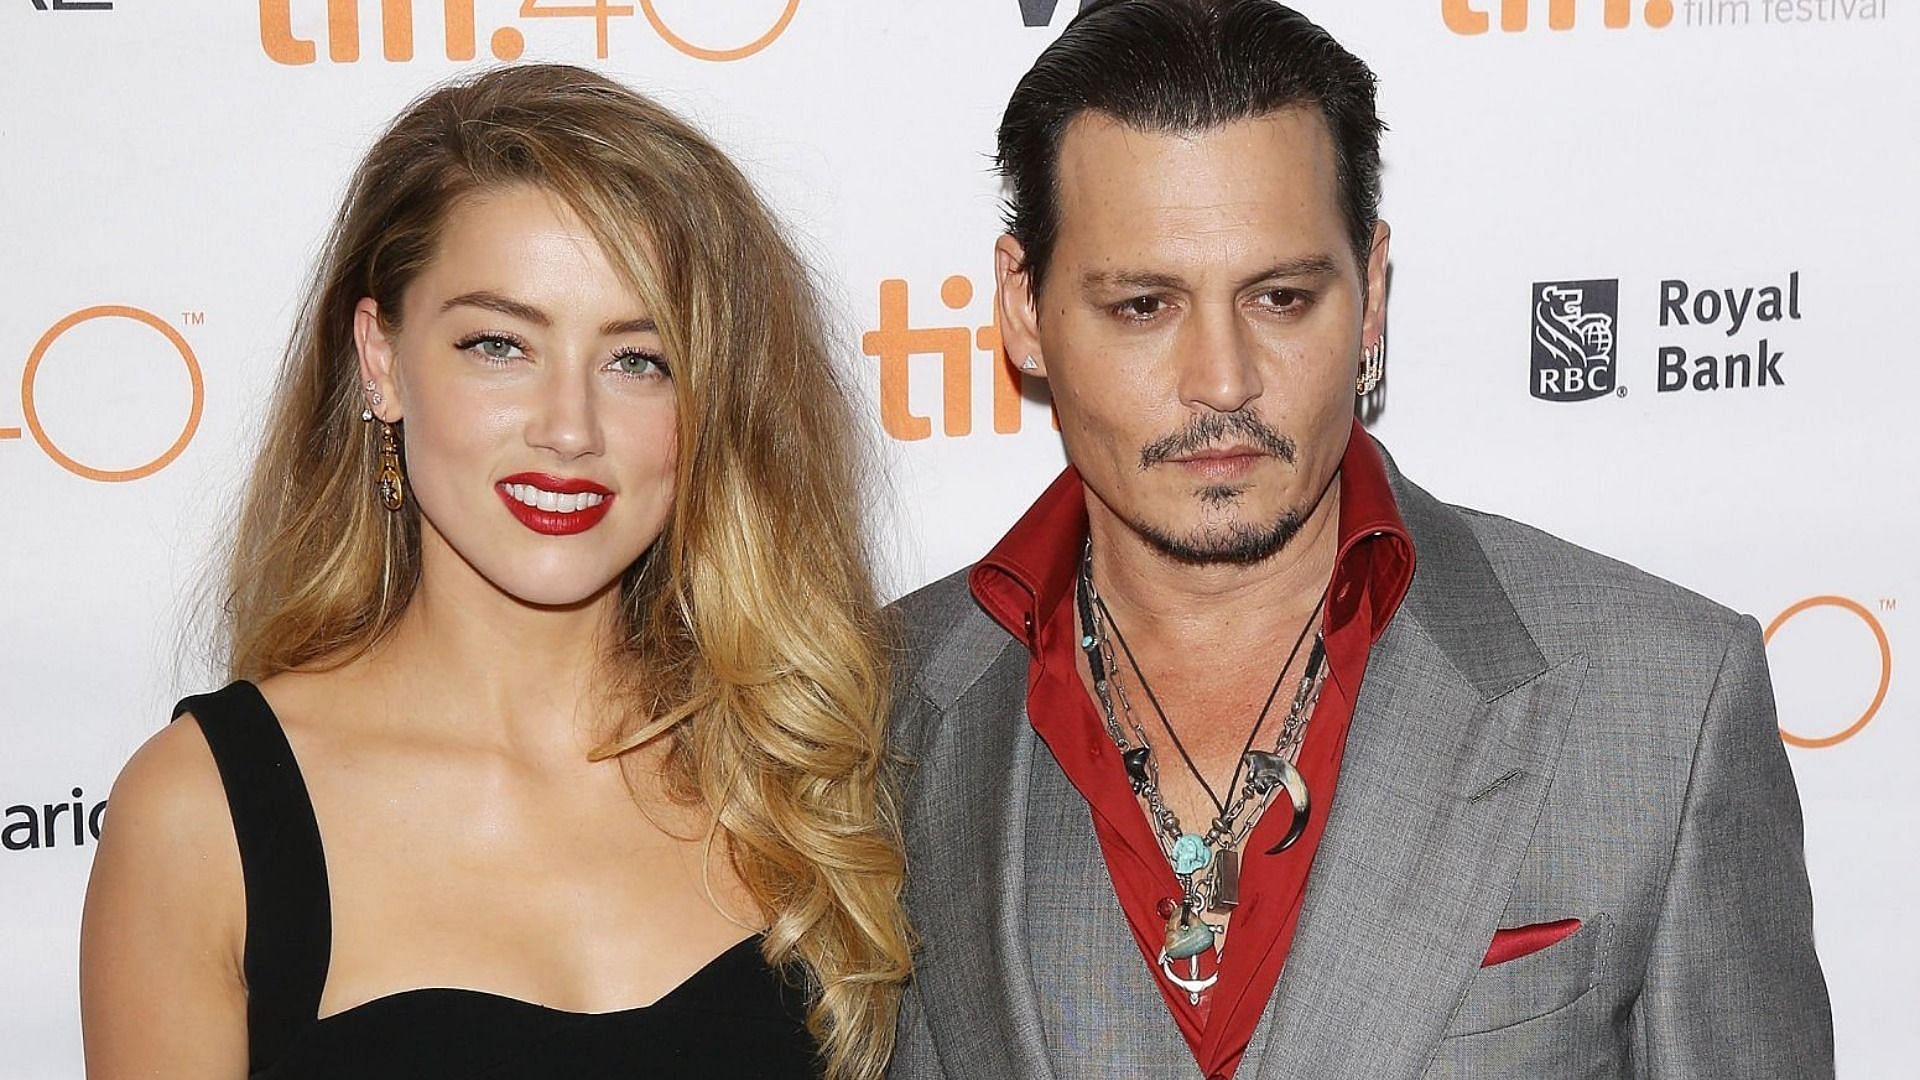 Johnny Depp opened up about his relationship with Amber Heard during his testimony on the defamation trial (Image via Michael Tran/Getty Images)